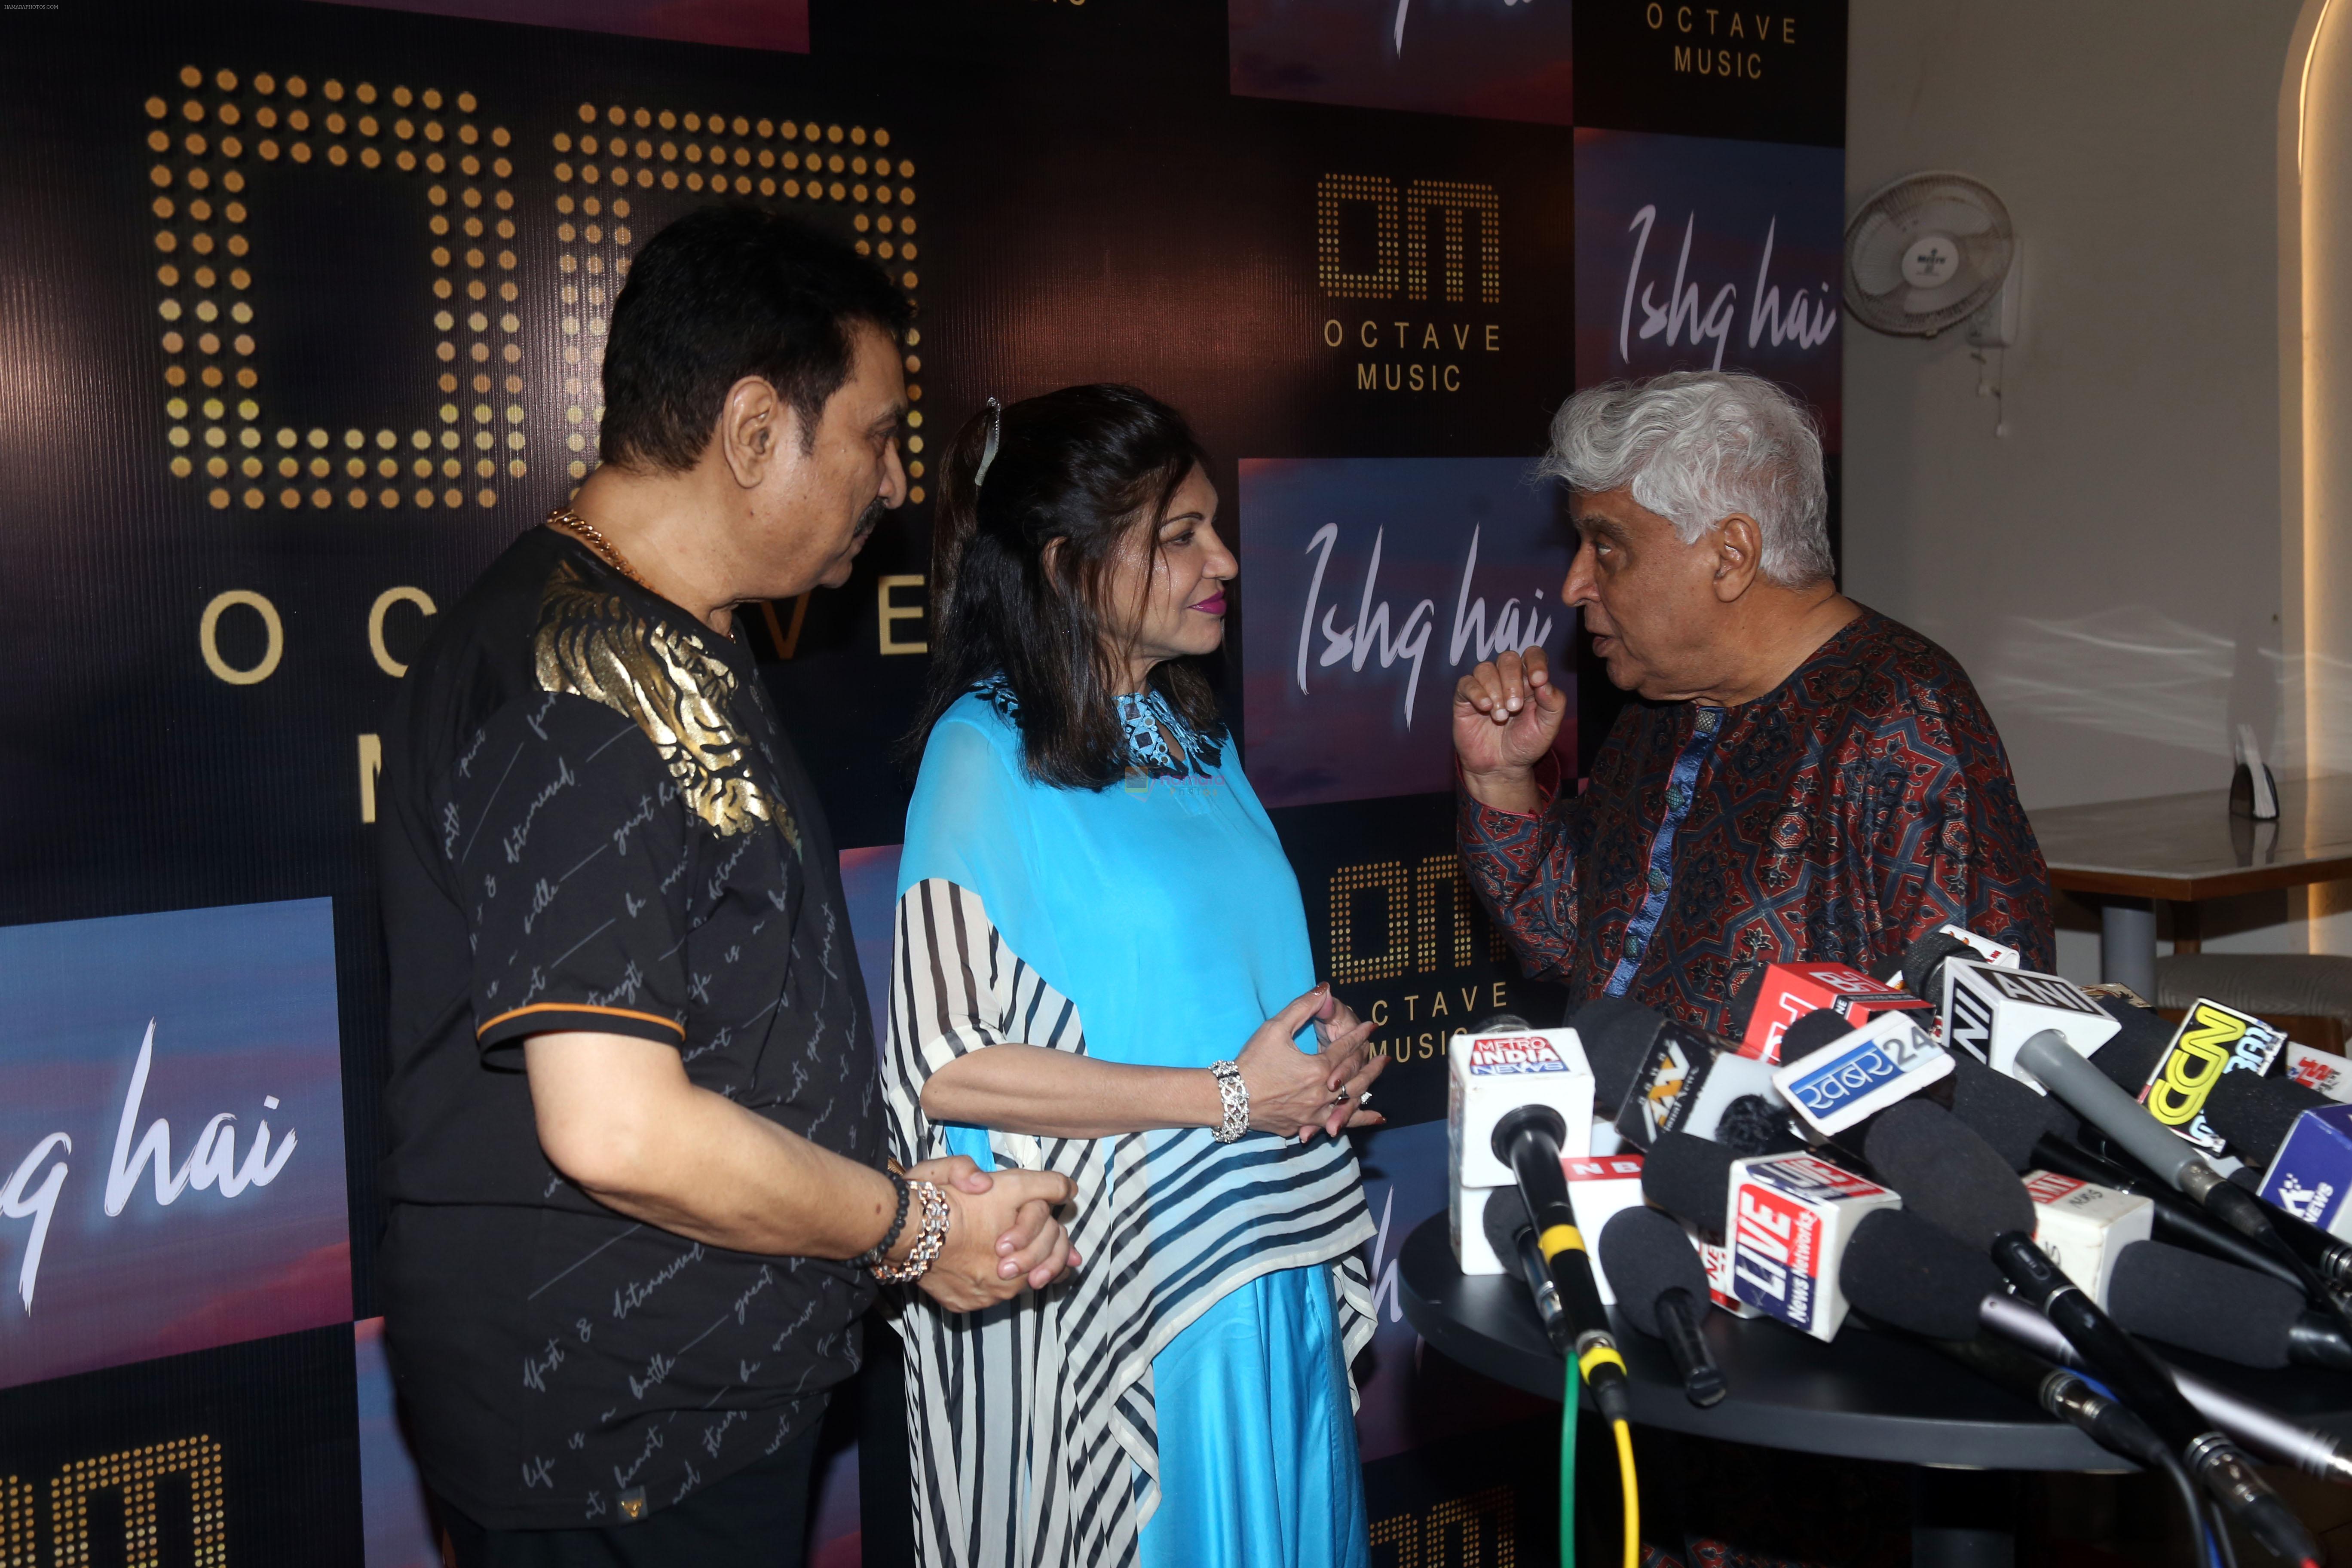 Alka Yagnik, Javed Akhtar, Kumar Sanu at the Launch of Octave Music and Ishq Hai Song on 22nd August 2023